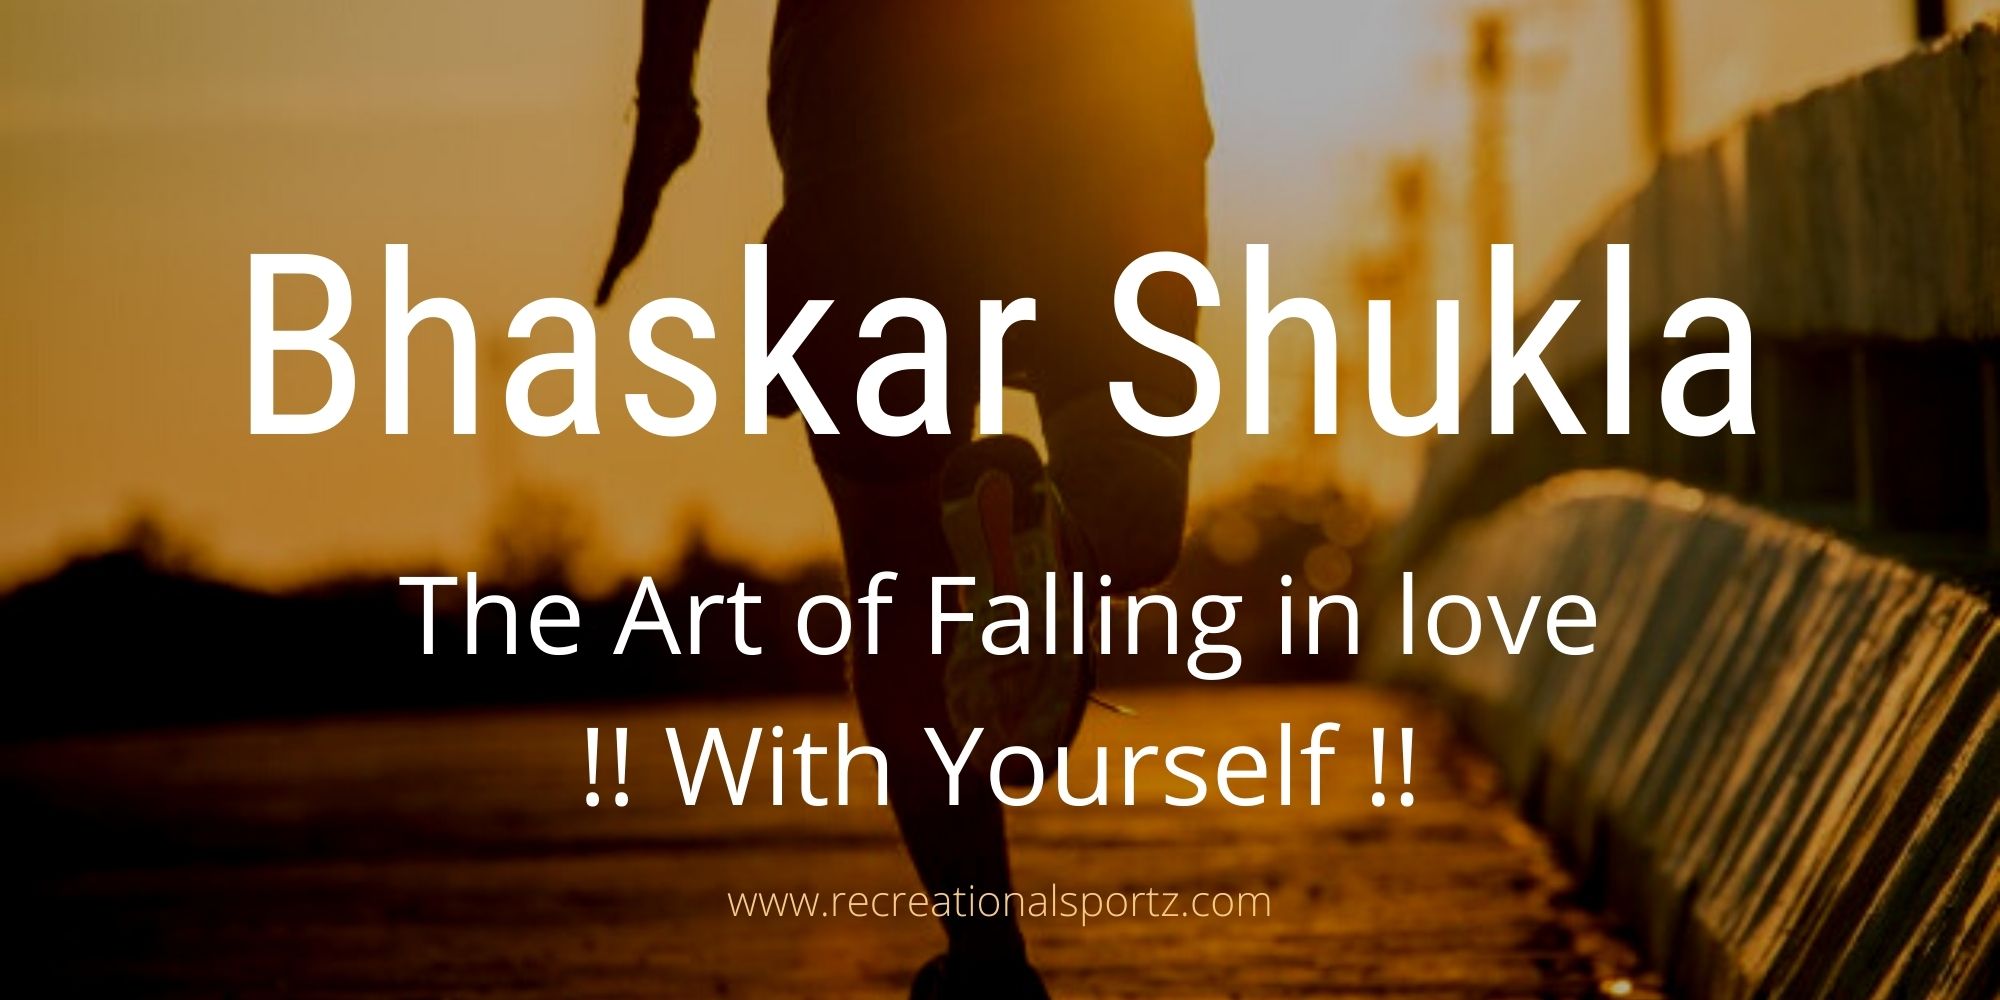 Lt Bhaskar Shukla: The Art of falling in love with yourself.